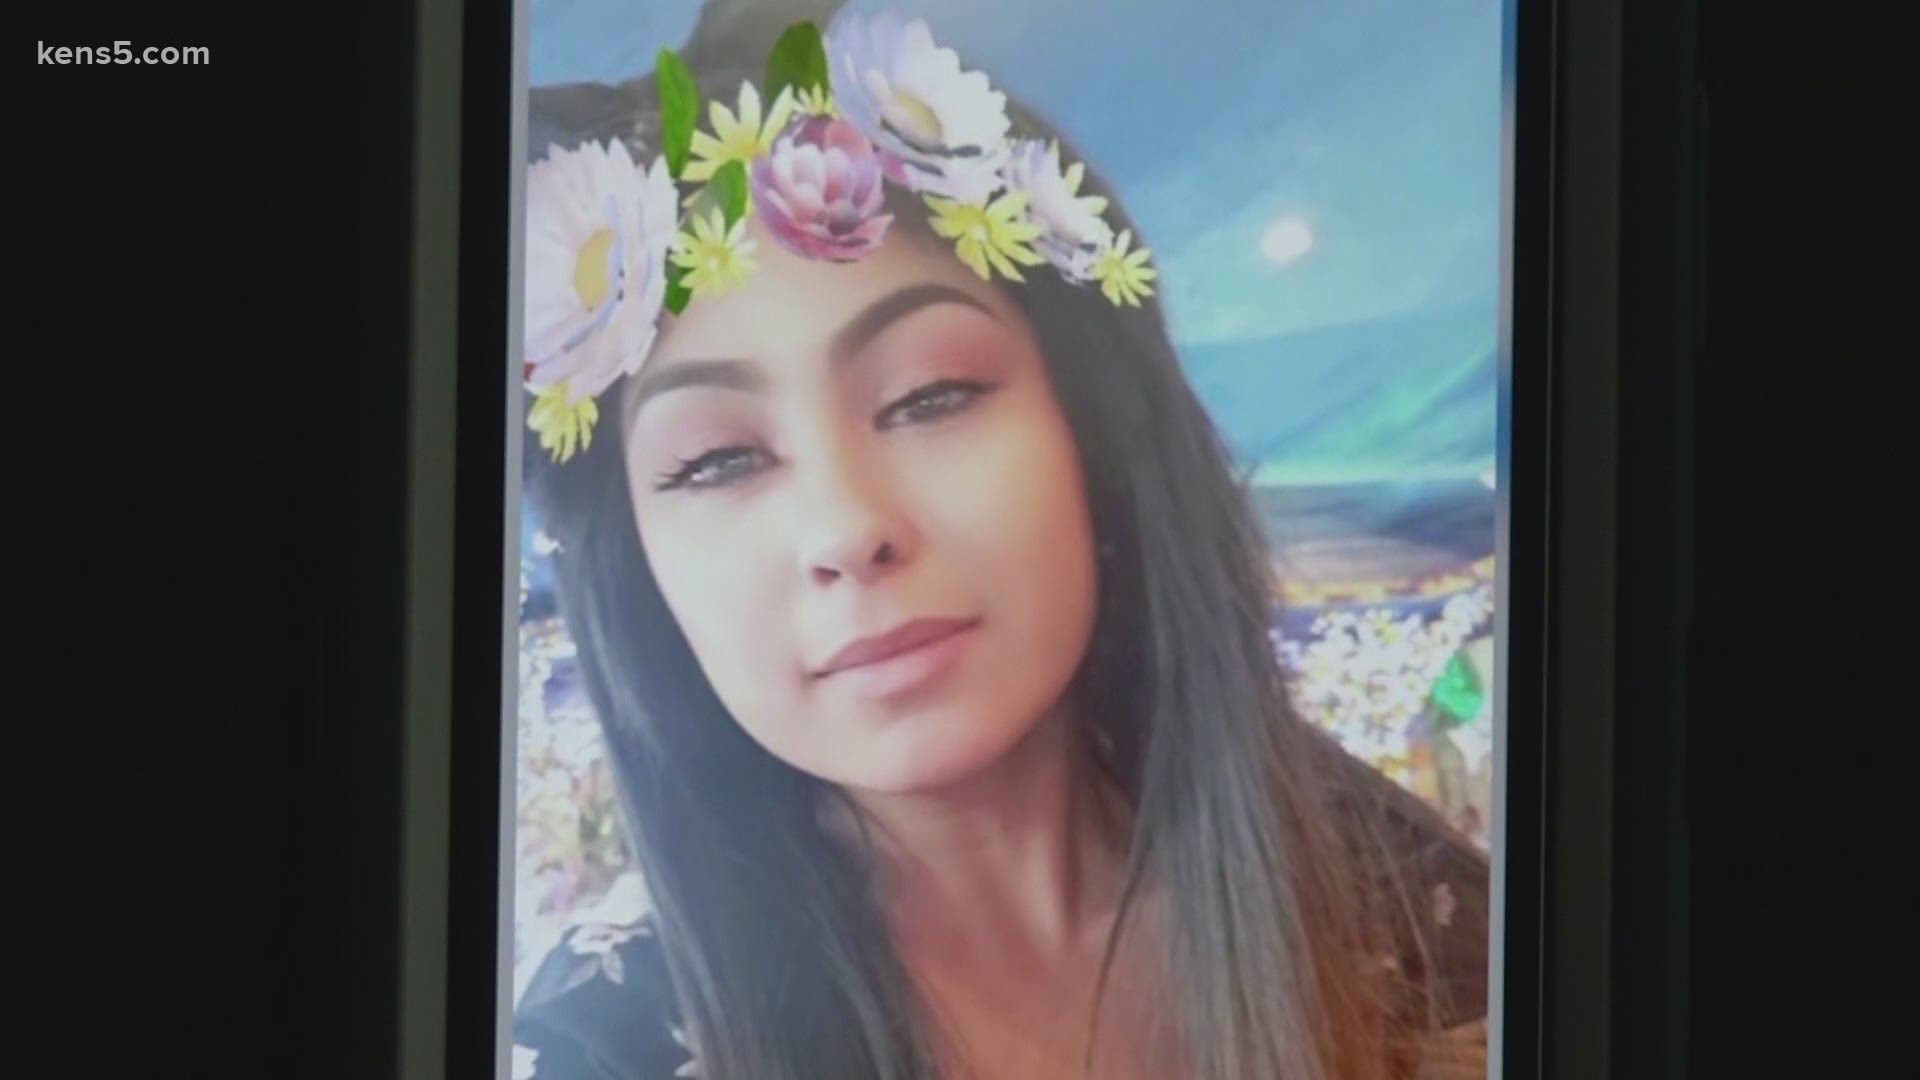 The family of Serenity Rodriguez has been told two lawmen encountered her walking with a much older man, stopping them just hours before the fatal crash.